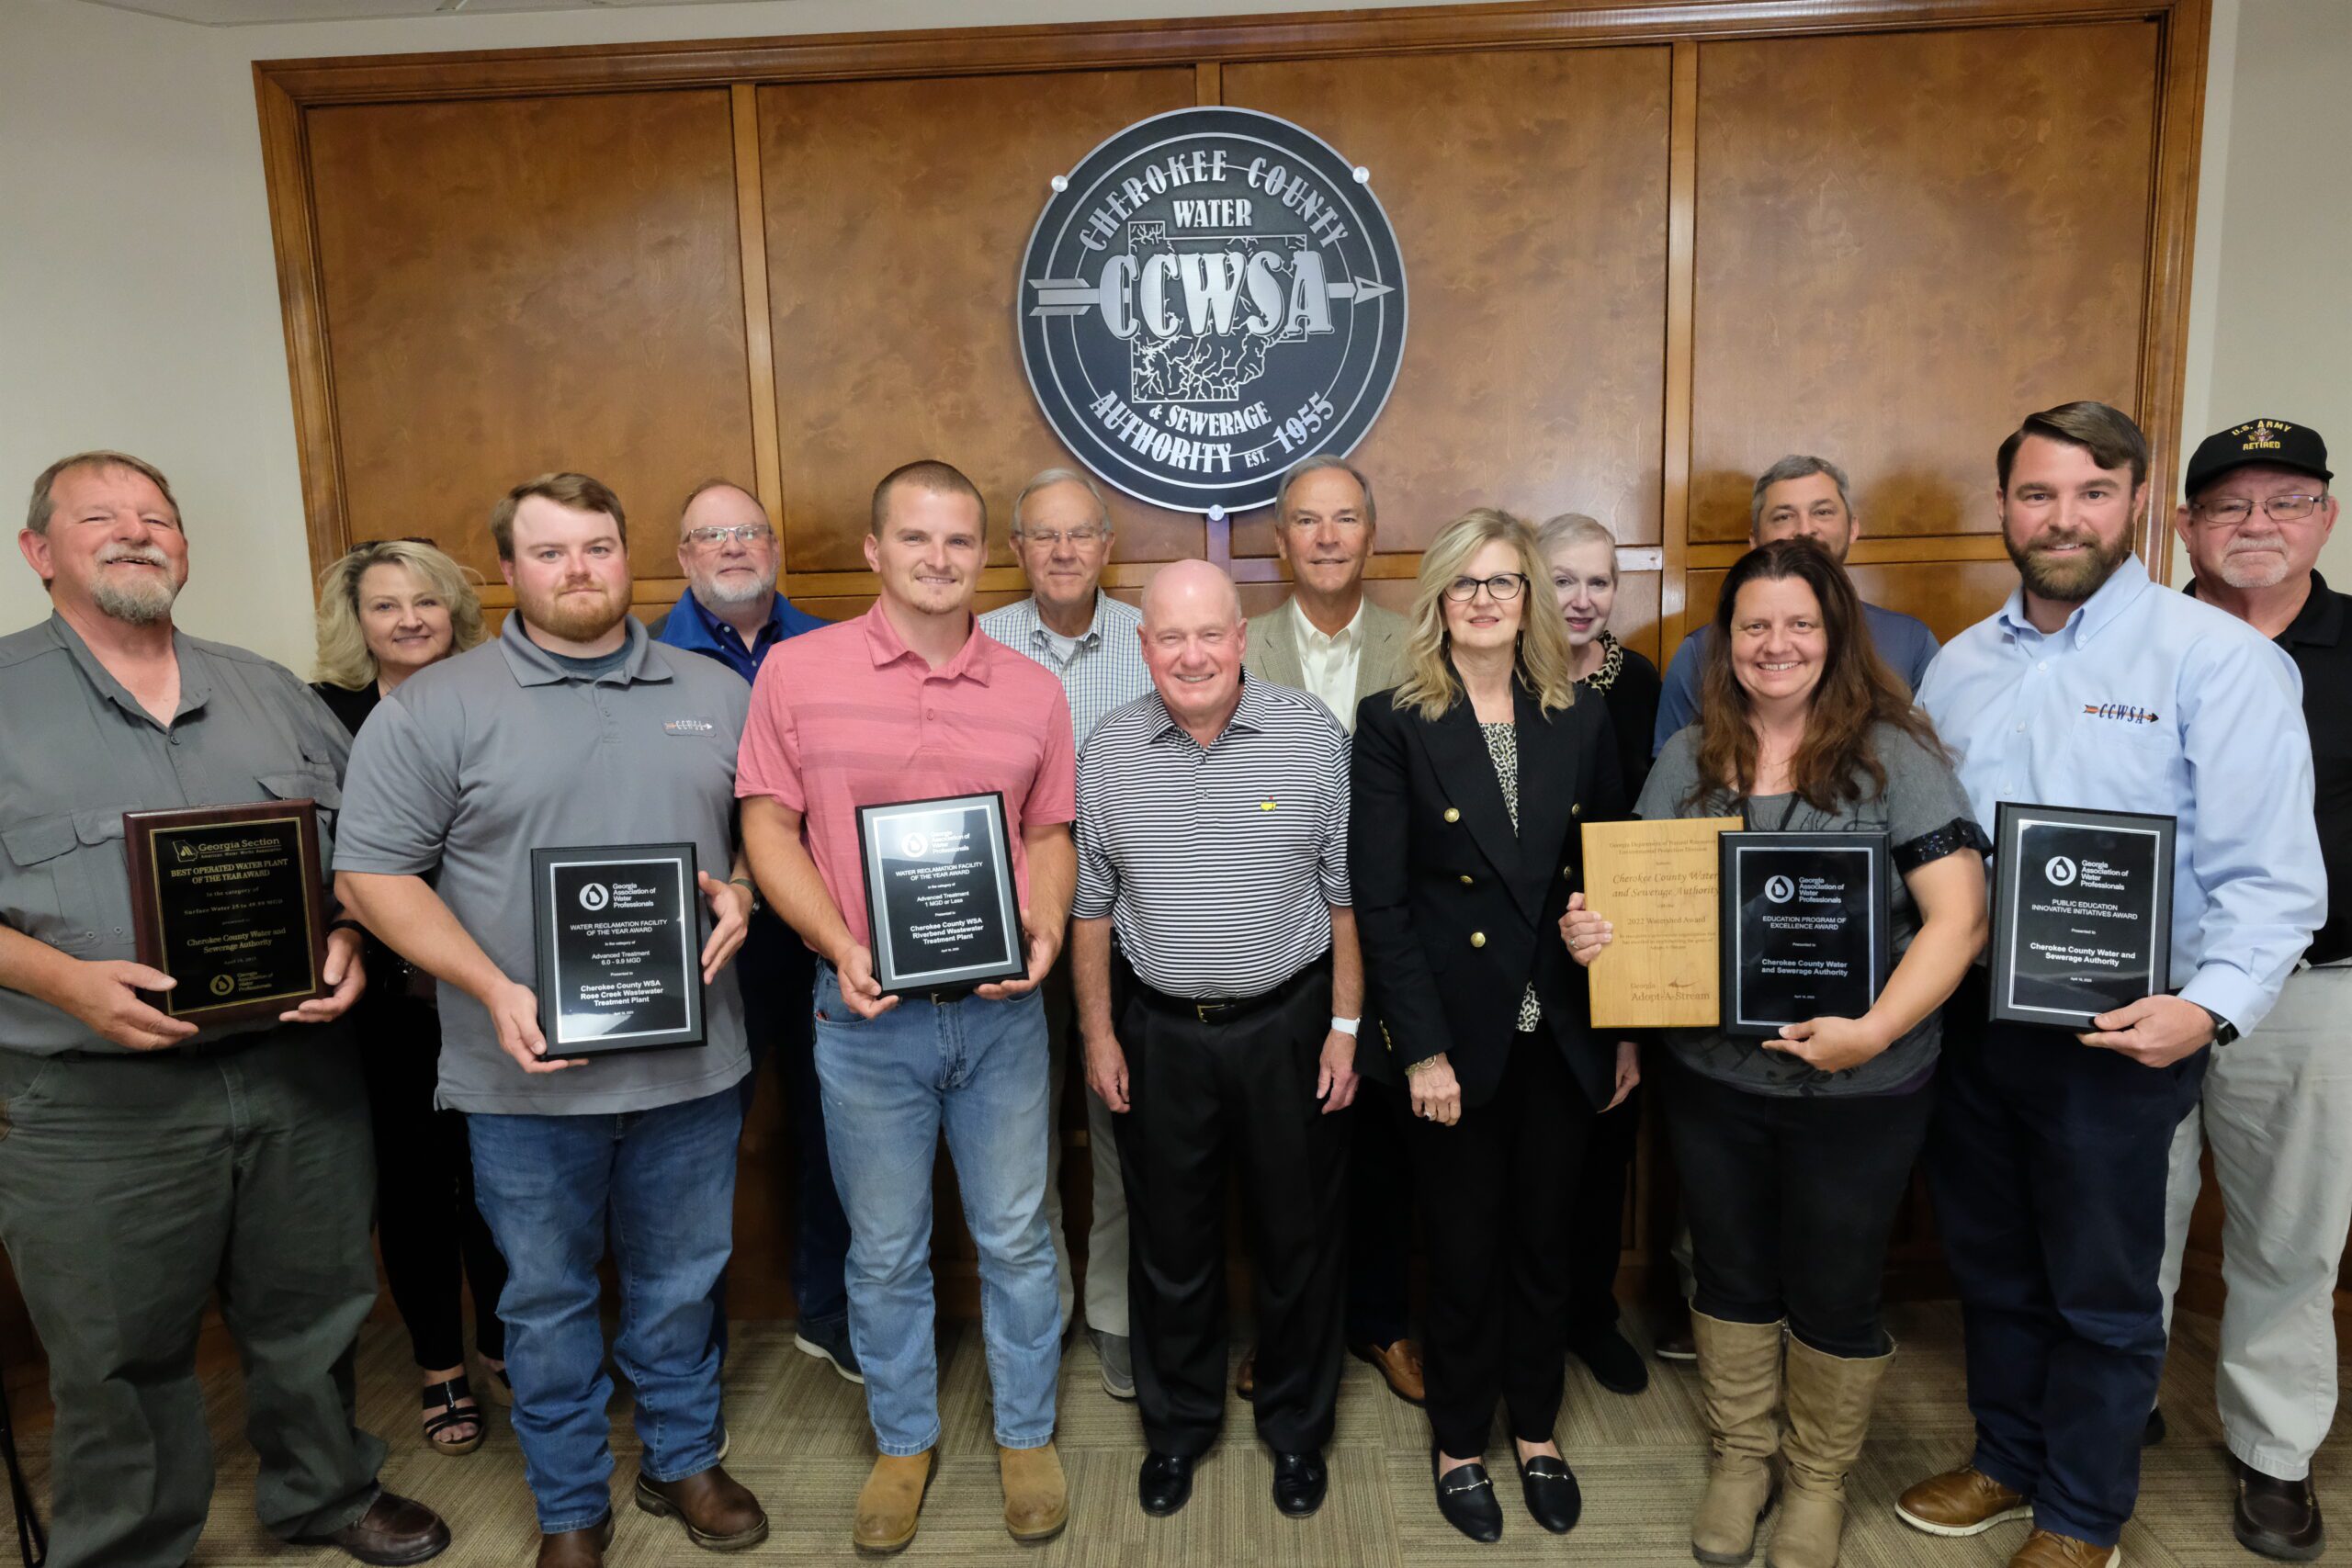 Congratulations CCWSA employees for receiving multiple awards at GAWP